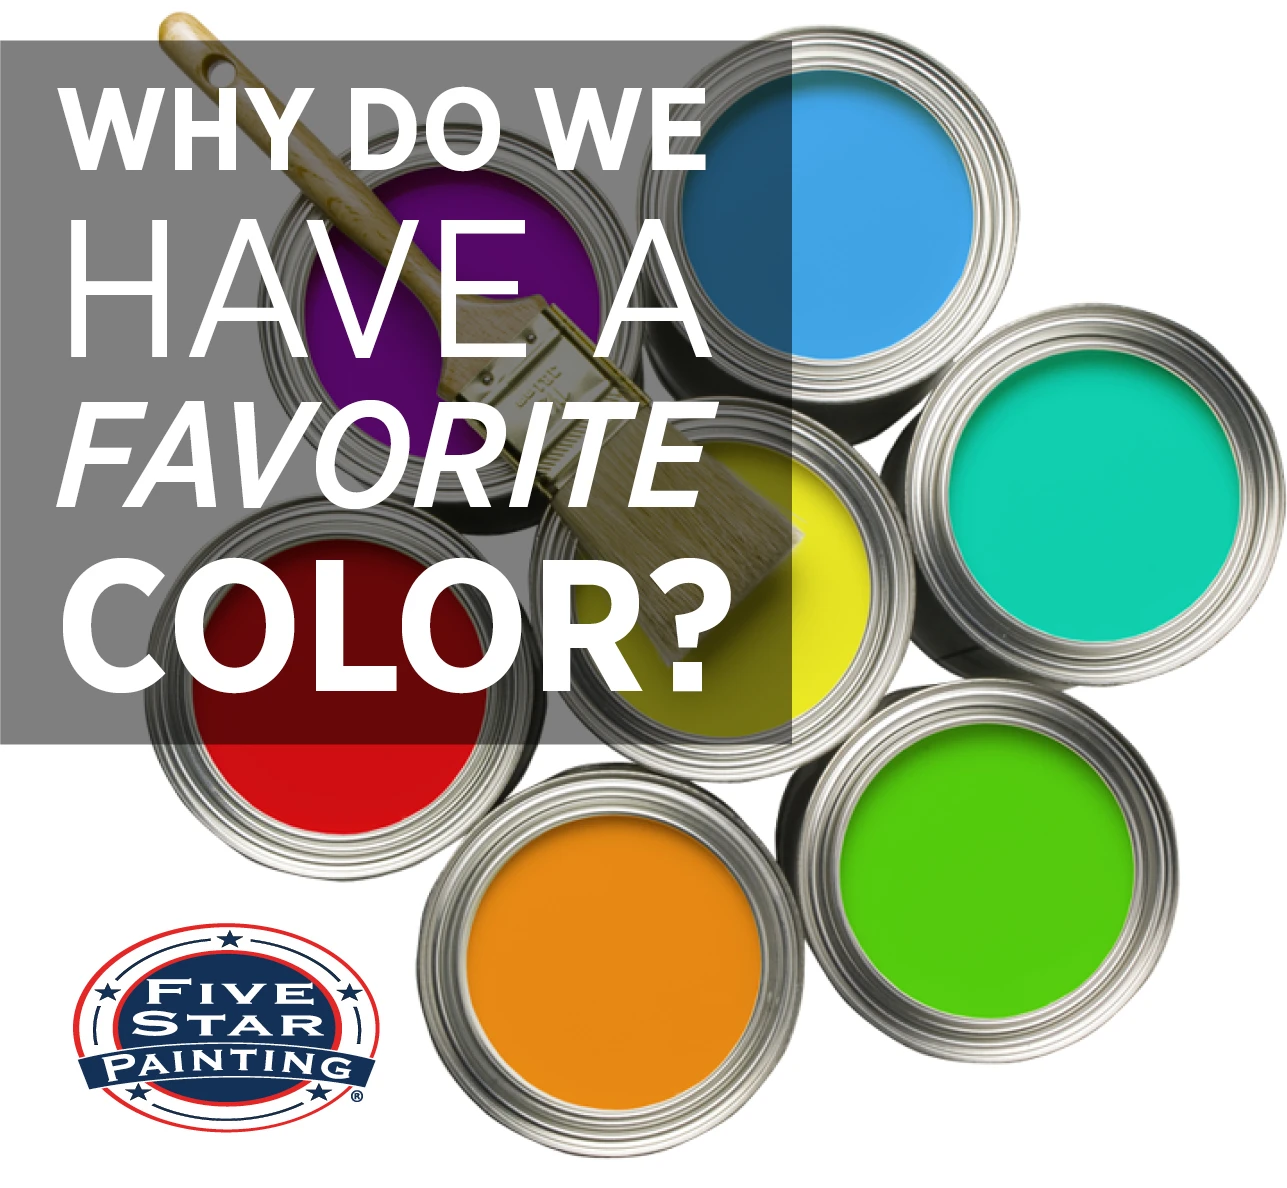 Blog title superimposed over a photo of seven paint cans full of primary rainbow colors, Five Star Painting logo in the bottom left